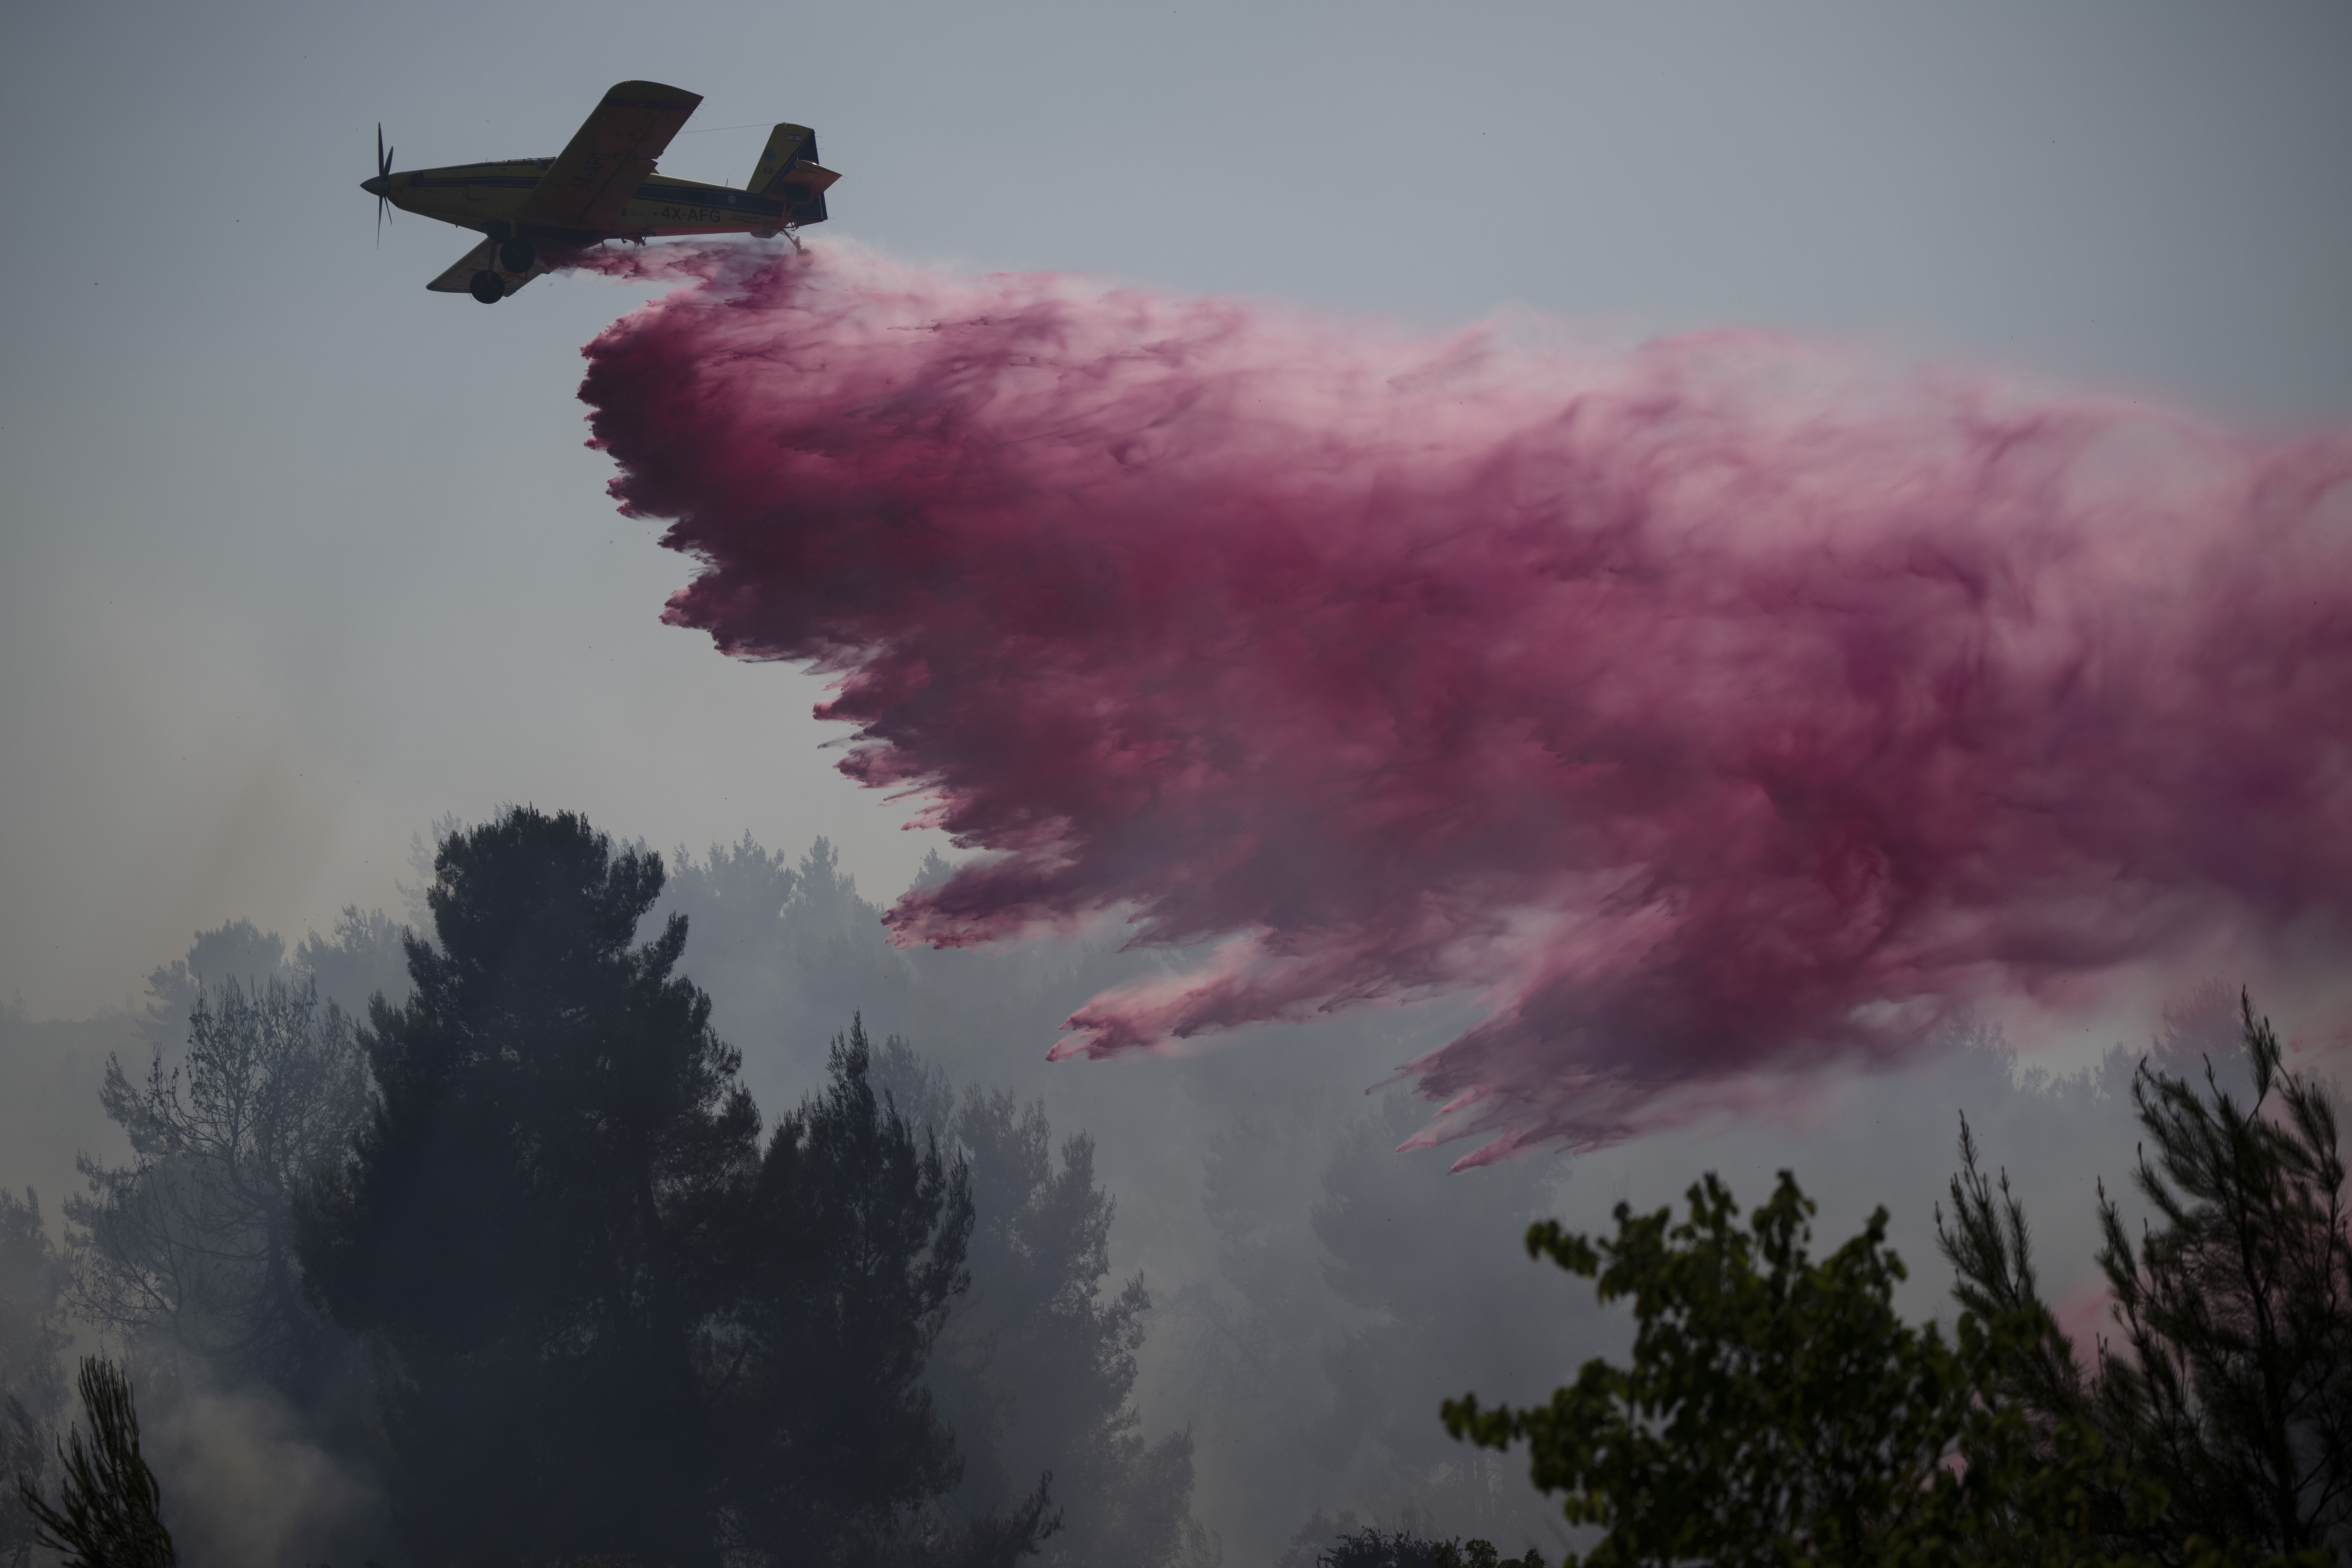 A plane uses a fire retardant to extinguish a fire burning in an area near the border with Lebanon